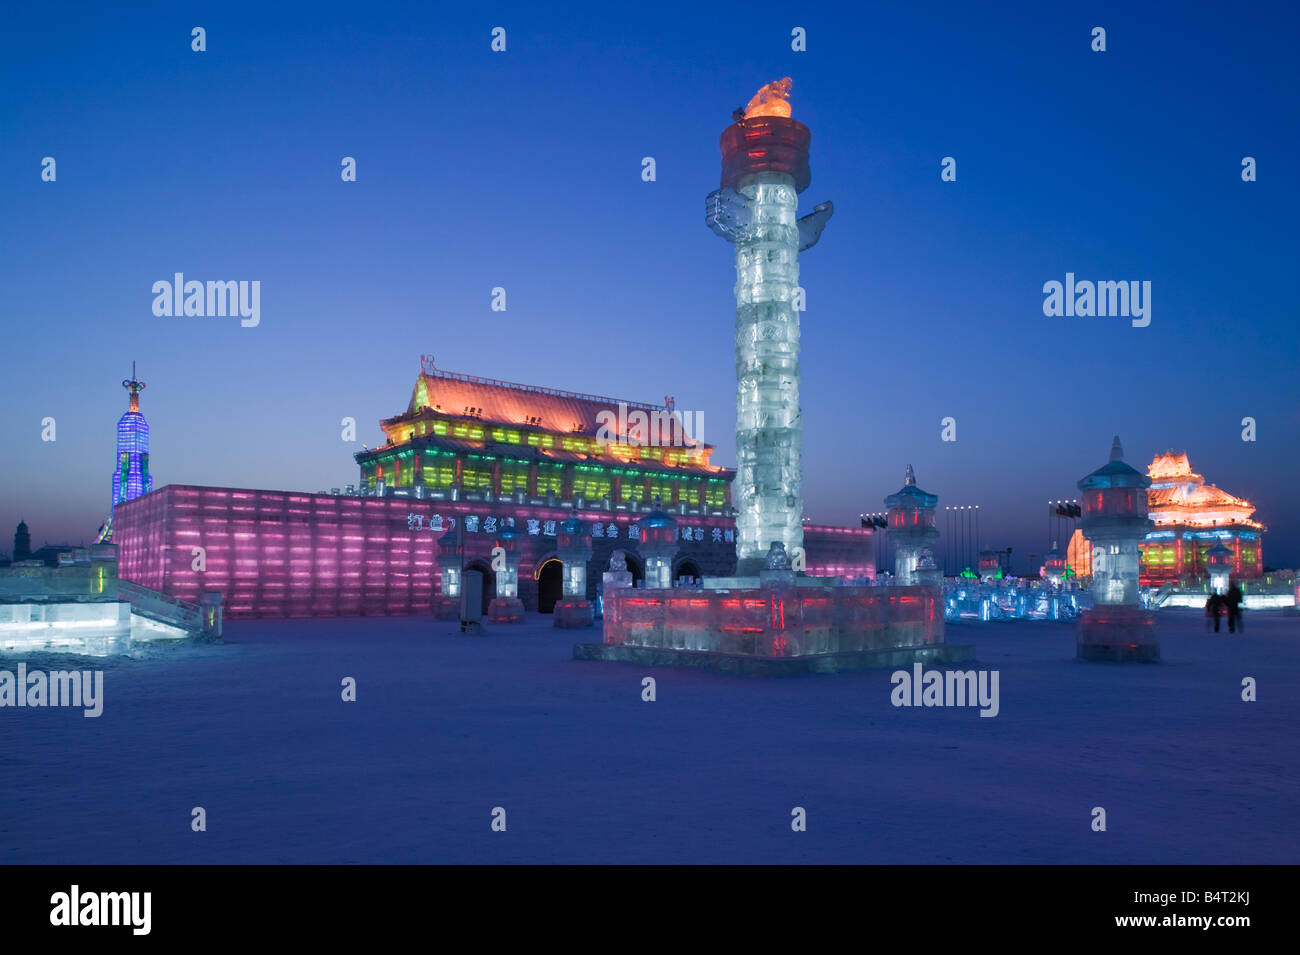 China, Heilongjiang, Harbin, Ice and Snow Festival, Buildings built of ice, Gate of Heavenly Peace made of Ice Stock Photo